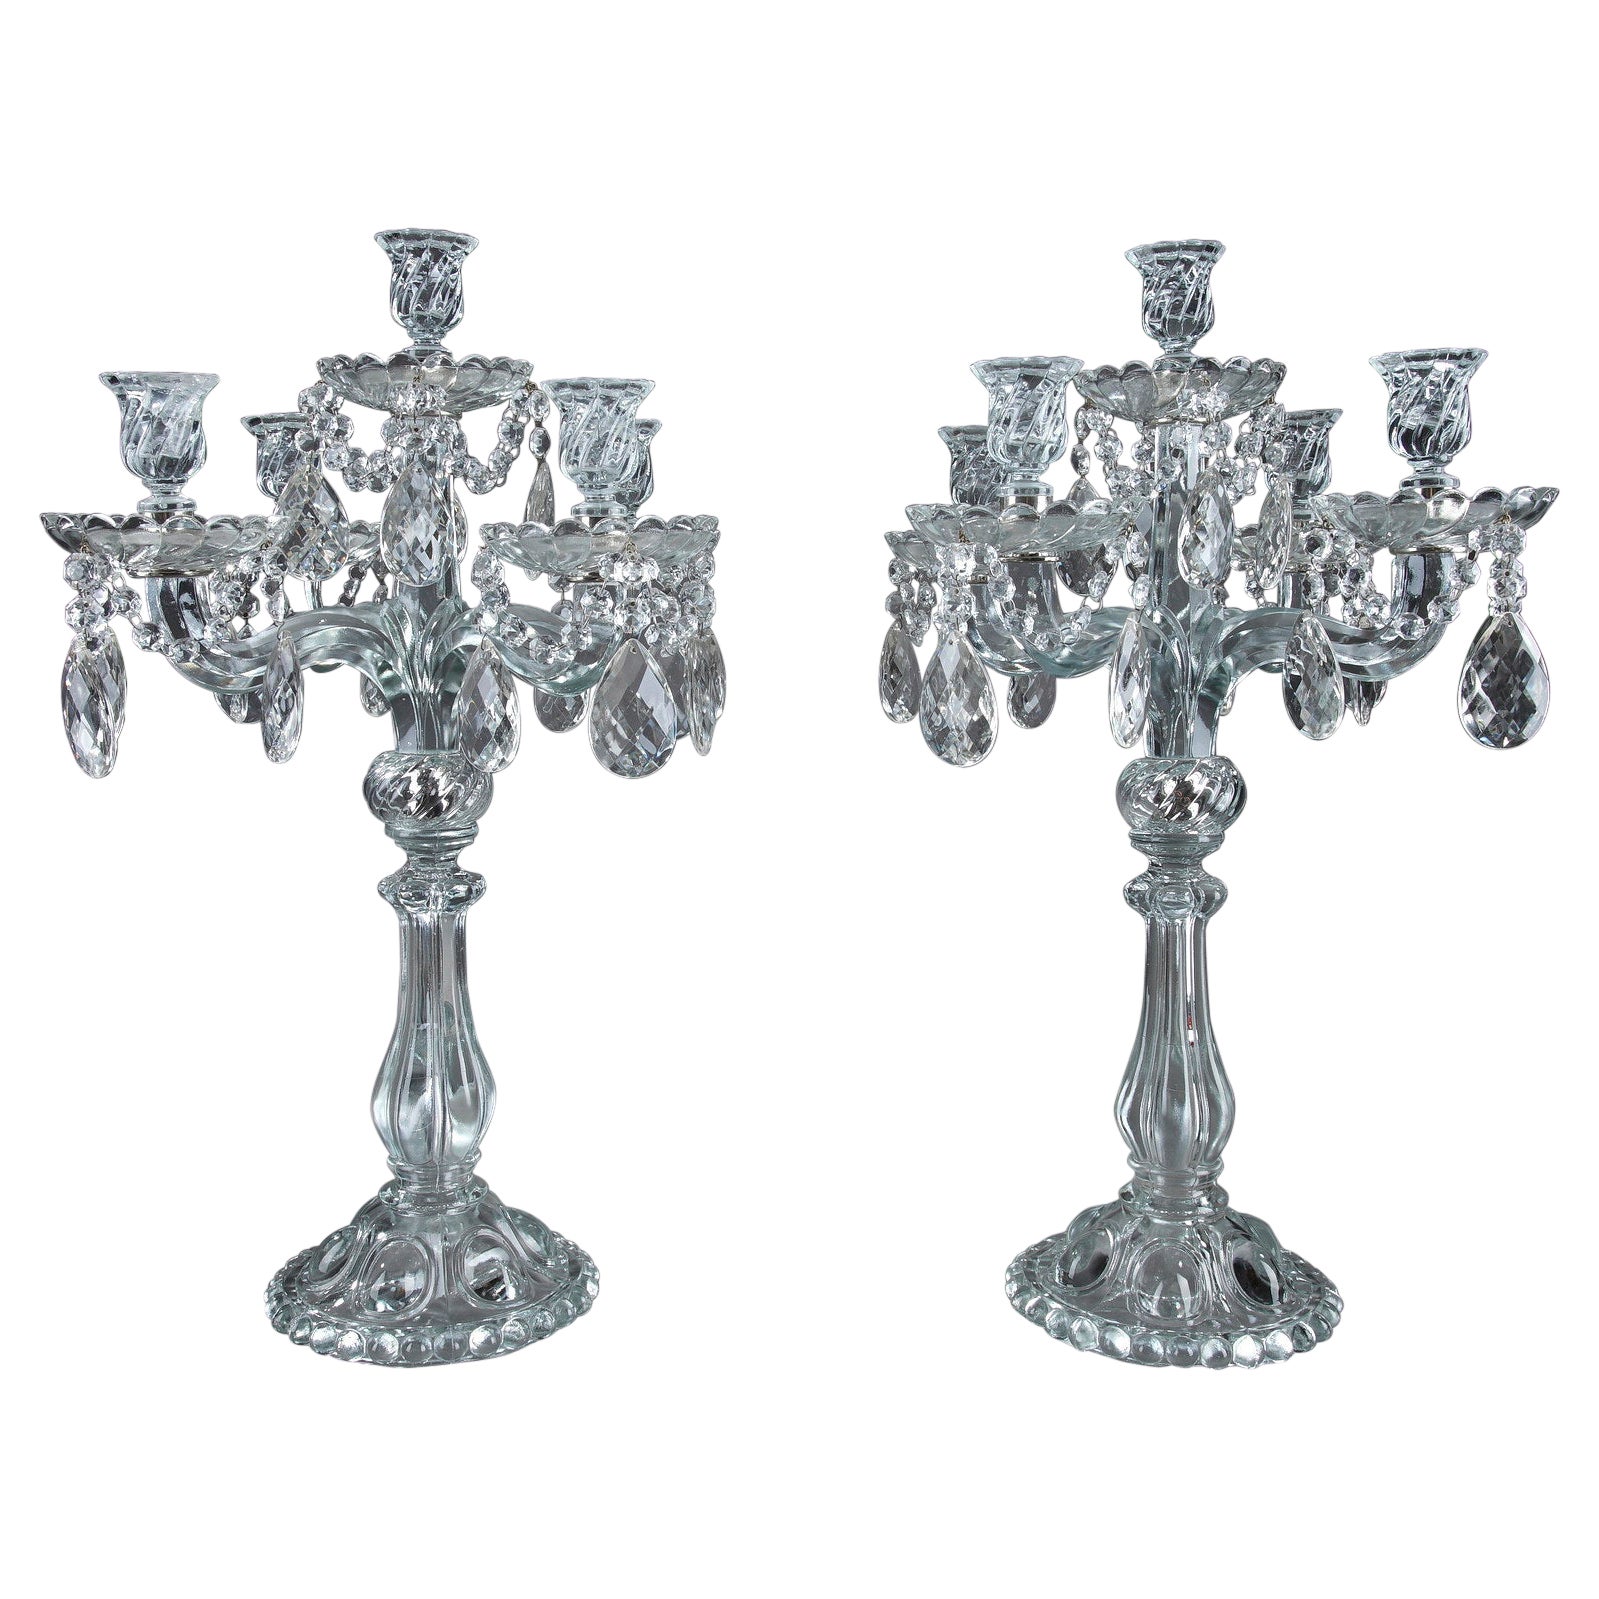 Pair of Glass Candelabras with Crystal Pendants